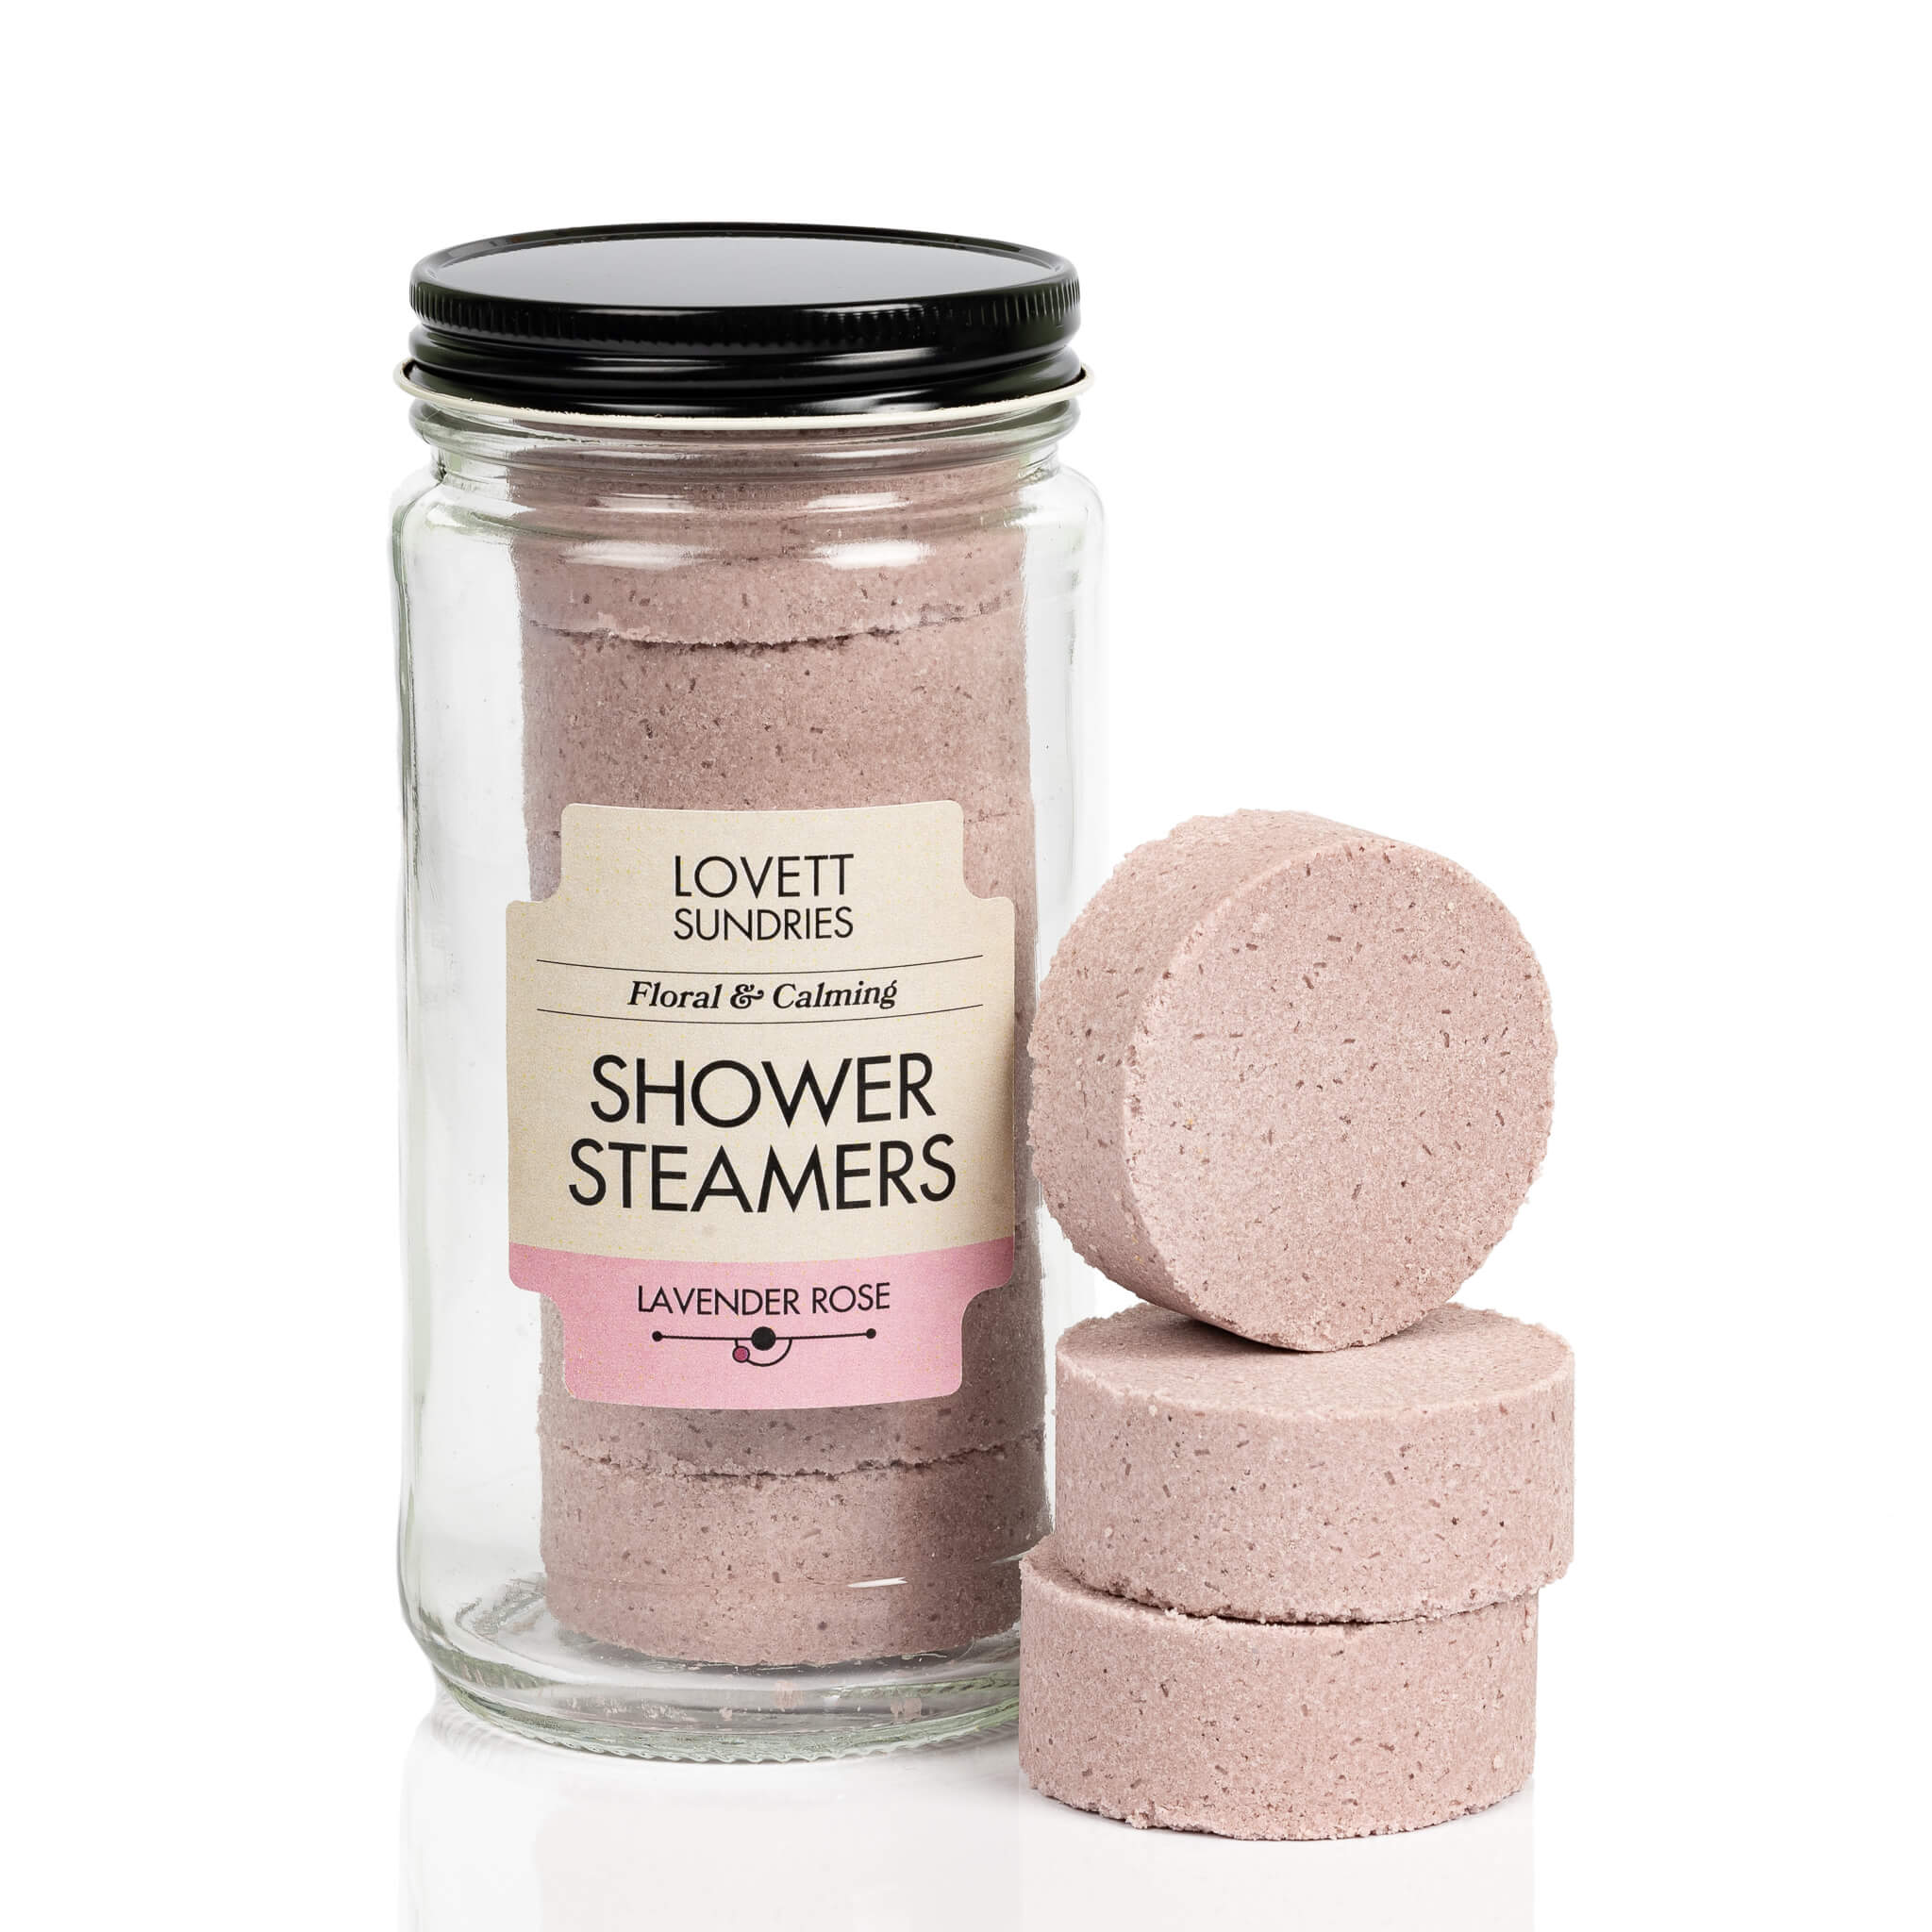 Recyclable glass jar filled with 6 lavender rose scented all natural shower steamers.